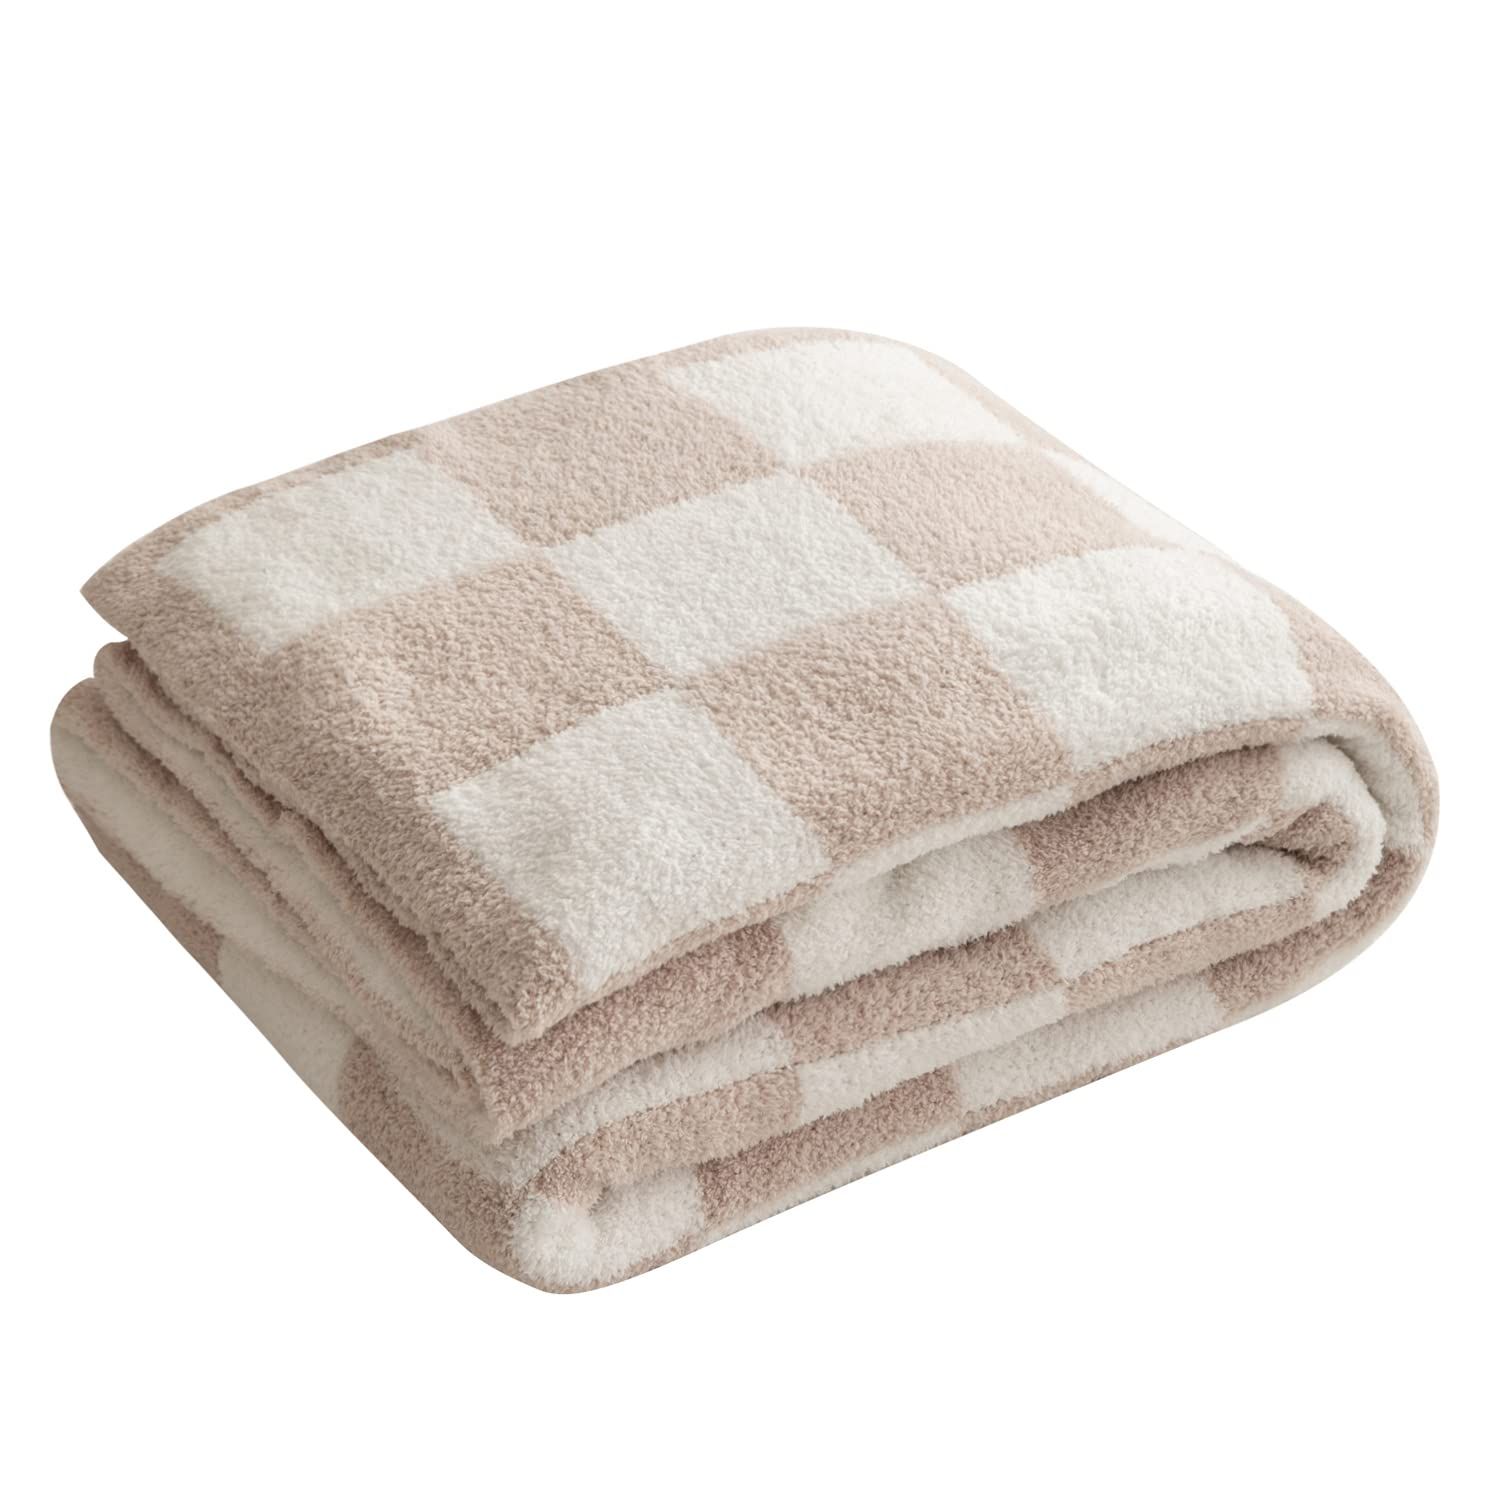 Throw Blanket with Checkerboard Plaid- Cozy Breathable All Seasons Soft Checkered Blanket Gingham Ho | Amazon (US)